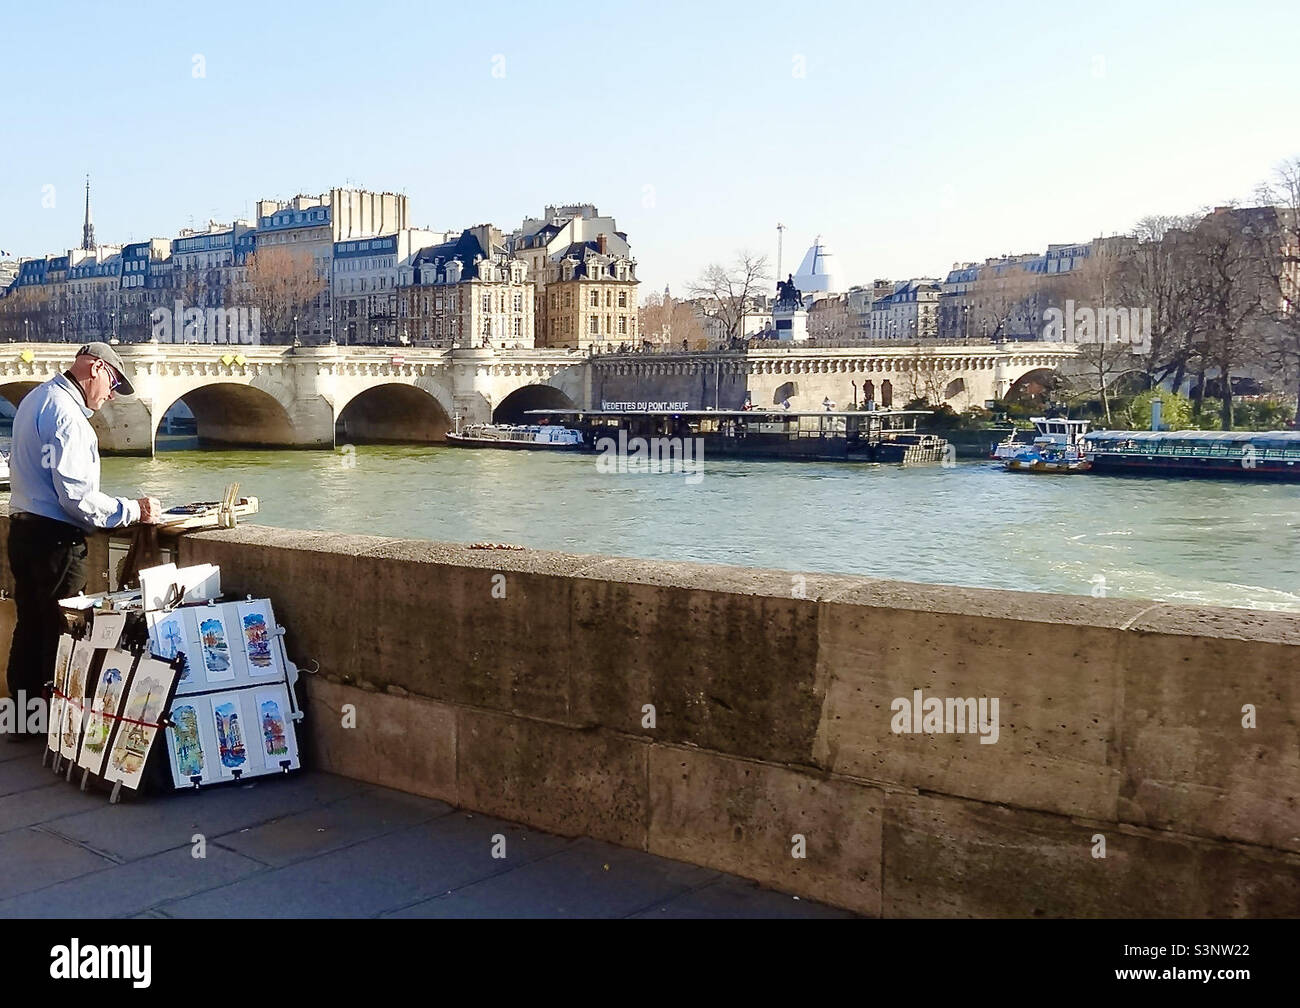 An artist painting by the River Seine in Paris, France, facing the Left Bank, near the Pont Neuf (New Bridge: 1578-1607), the oldest bridge over the river. A bronze statue of King Henry IV is nearby. Stock Photo